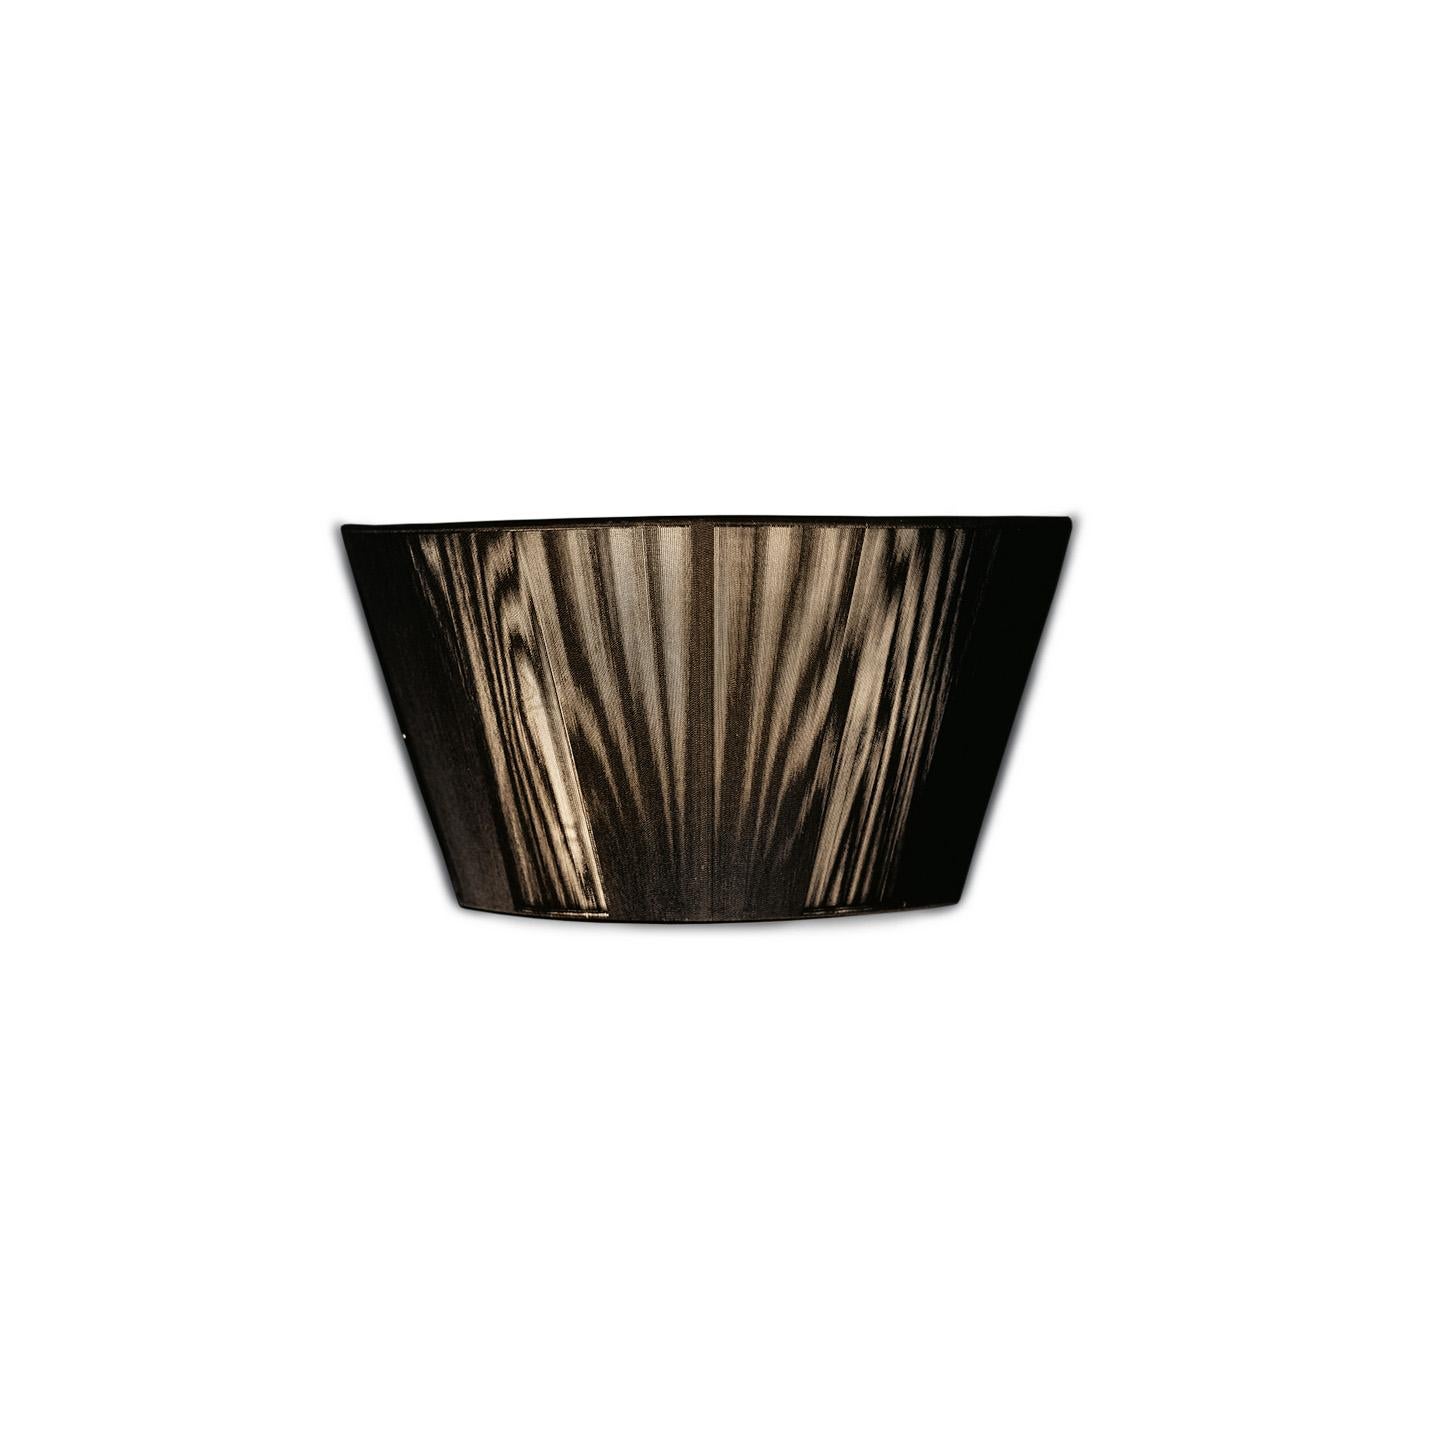 Leucos Lilith P Wall Sconce in Mocha, White and Brushed Nickel by Design Lab